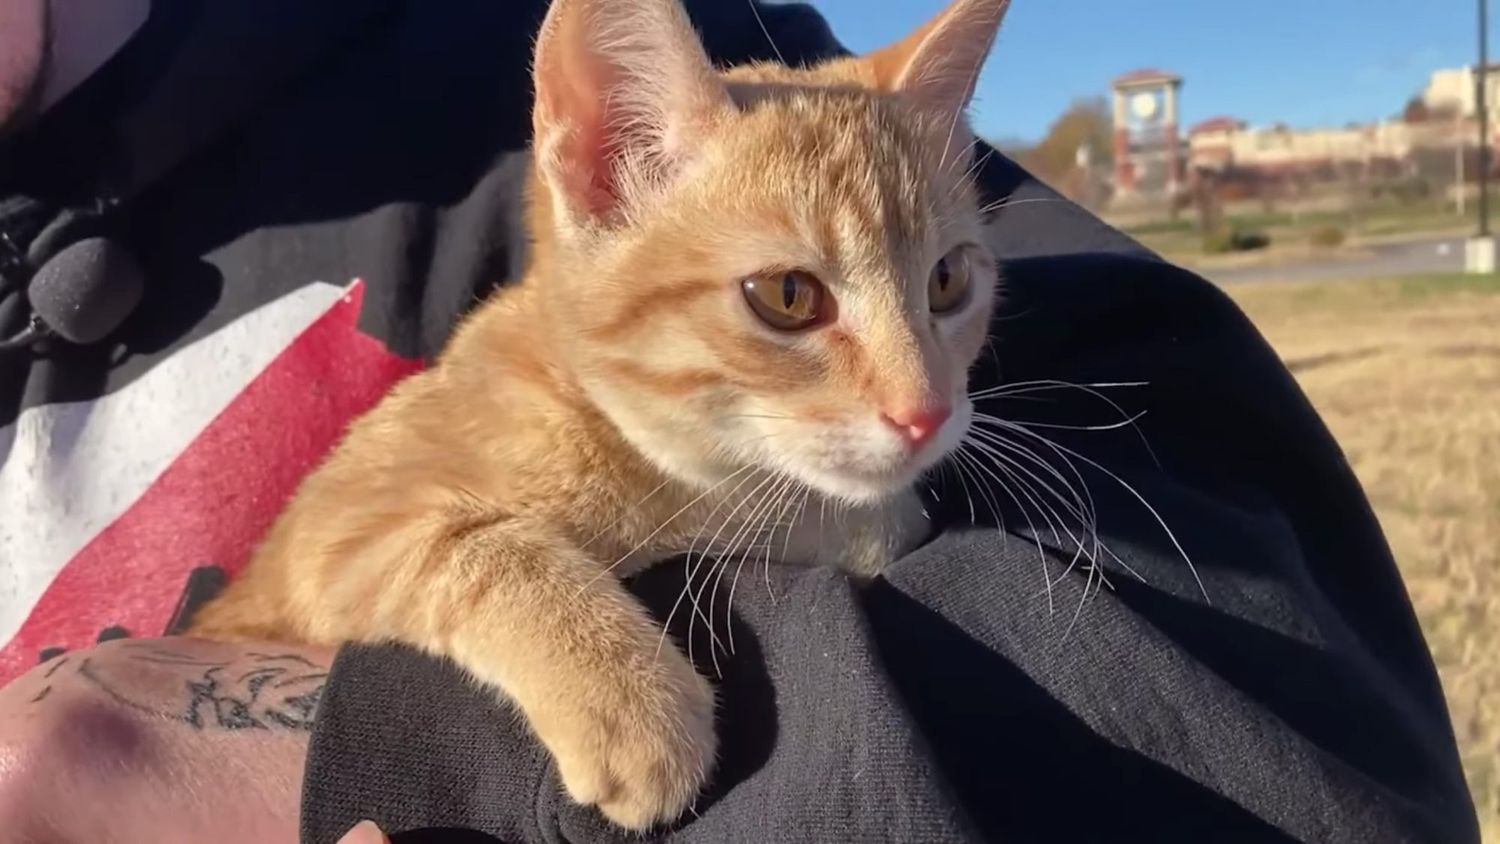 A family of Chiefs fans went on an Arrowhead Stadium tour and left with a cat they freed from a field goal net they say was wrapped around the kitten's neck.